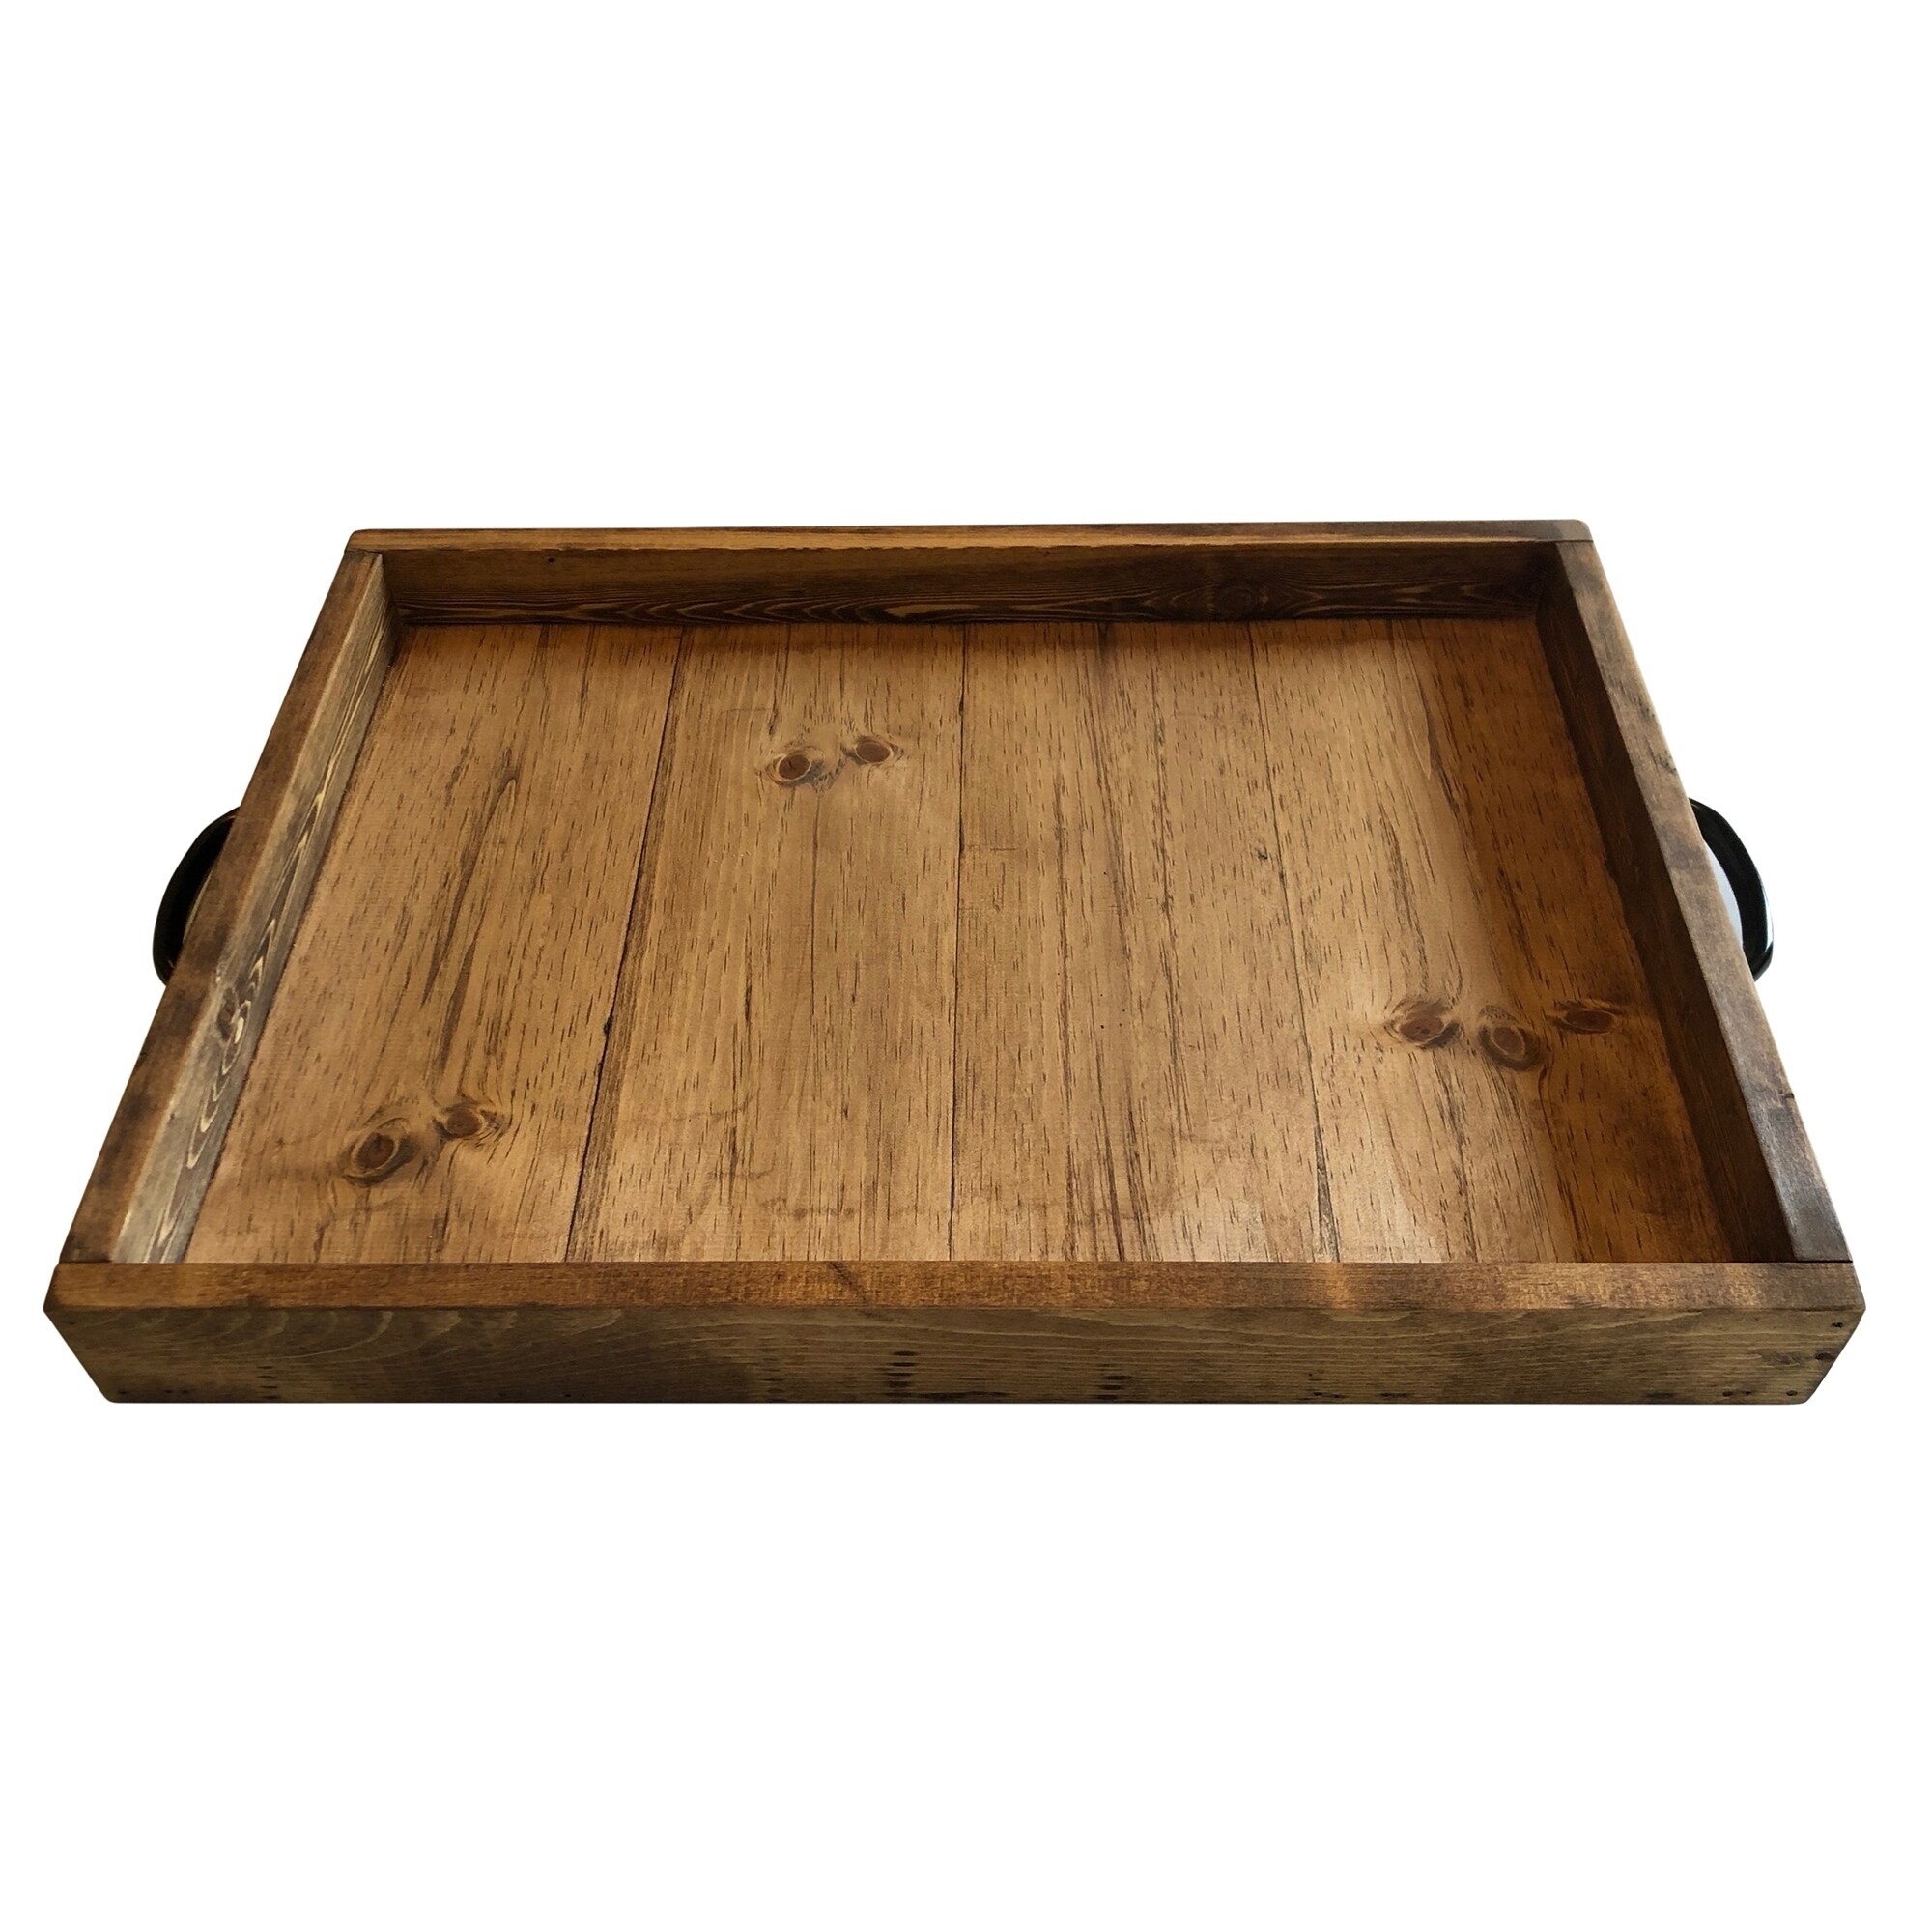 Wooden Farmhouse Tray With Metal Handles,Wooden Tray,Tray With Handles,Farmhouse Decor,Farmhouse,Farmhouse Tray,Wood Tray,Tray,Rustic Tray